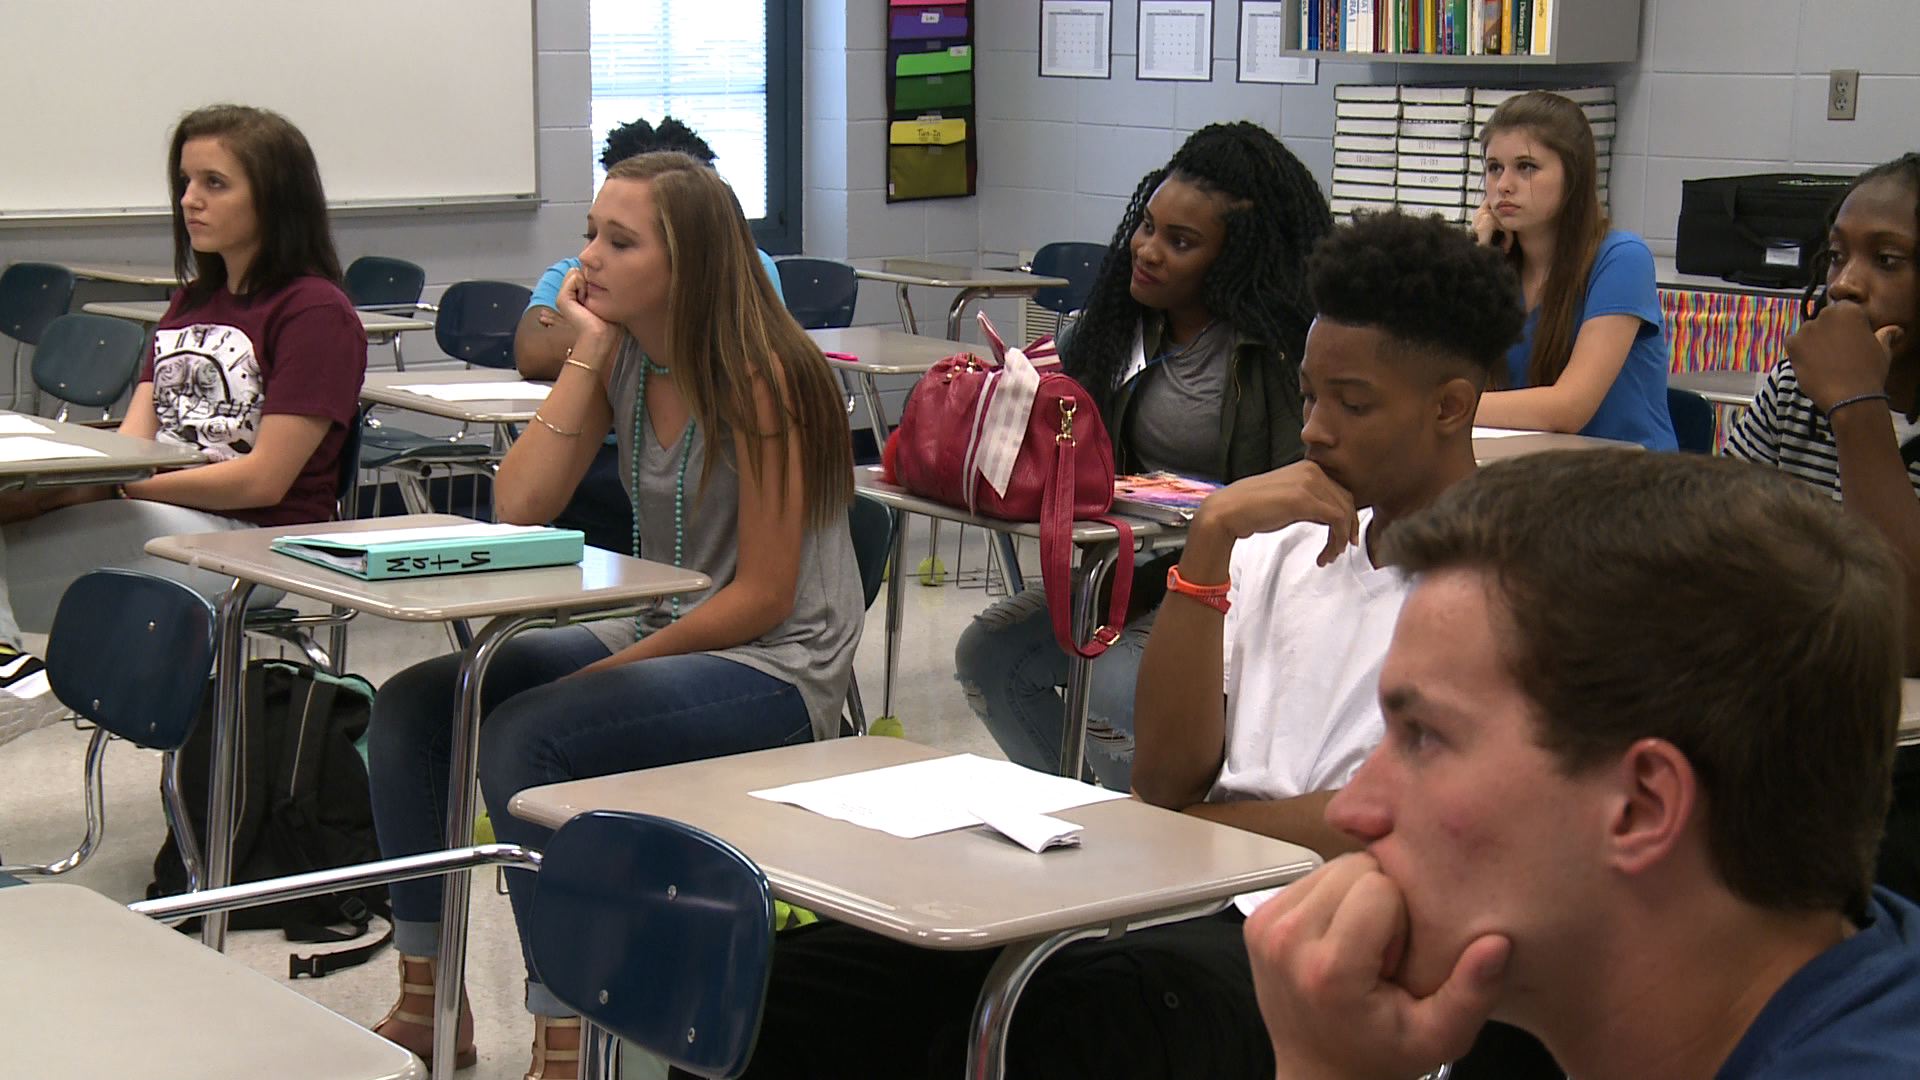 Students in Demopolis Head Back to Class for a New School Year